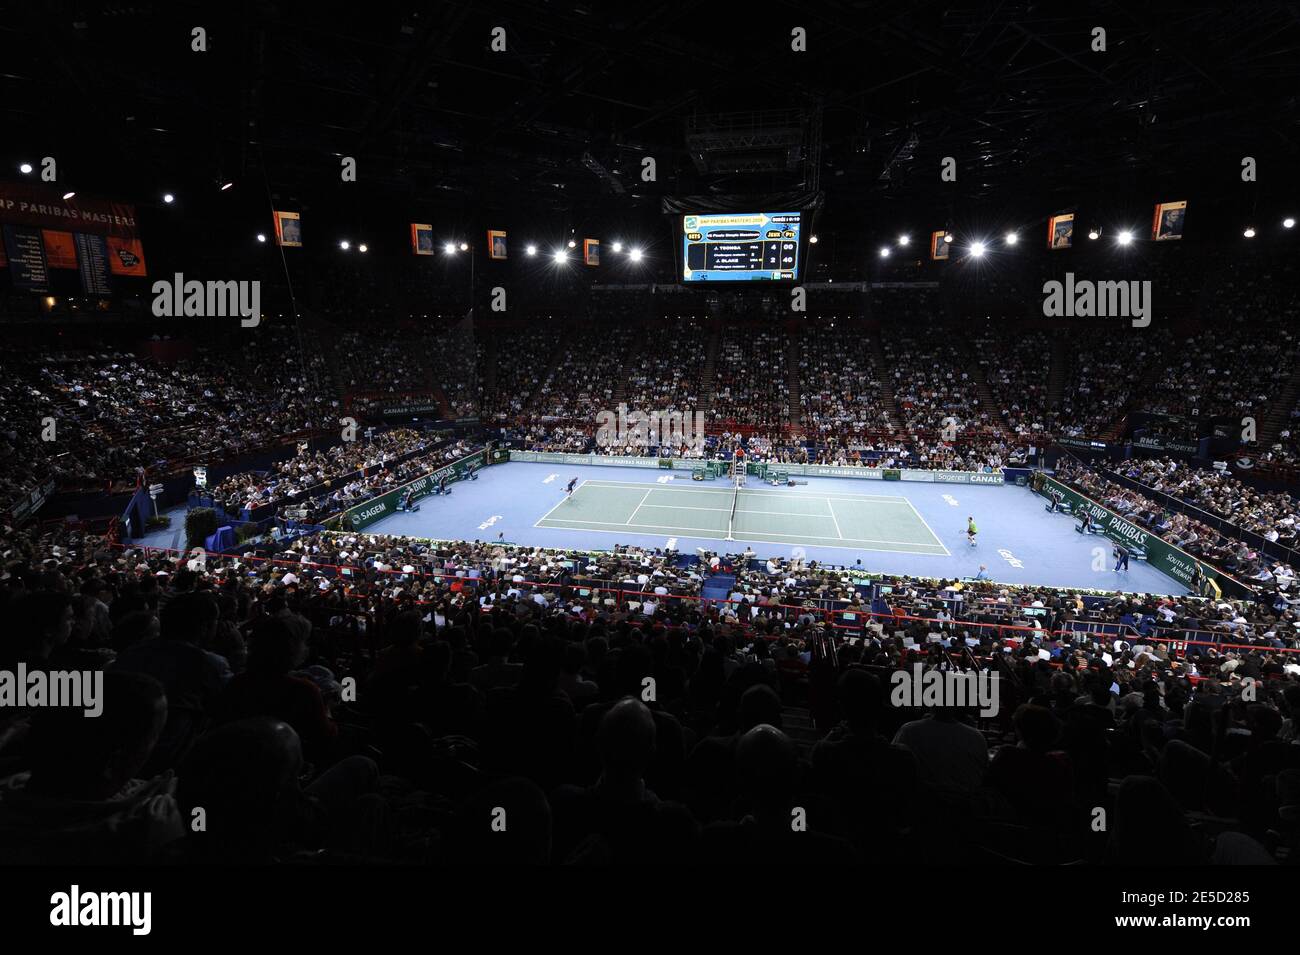 A general view of the BNP Paribas Masters indoor tennis tournament at the  Palais Omnisports Paris-Bercy in Paris, France, on November 1, 2008. Photo  by Henri Szwarc/Cameleon/ABACAPRESS.COM Stock Photo - Alamy